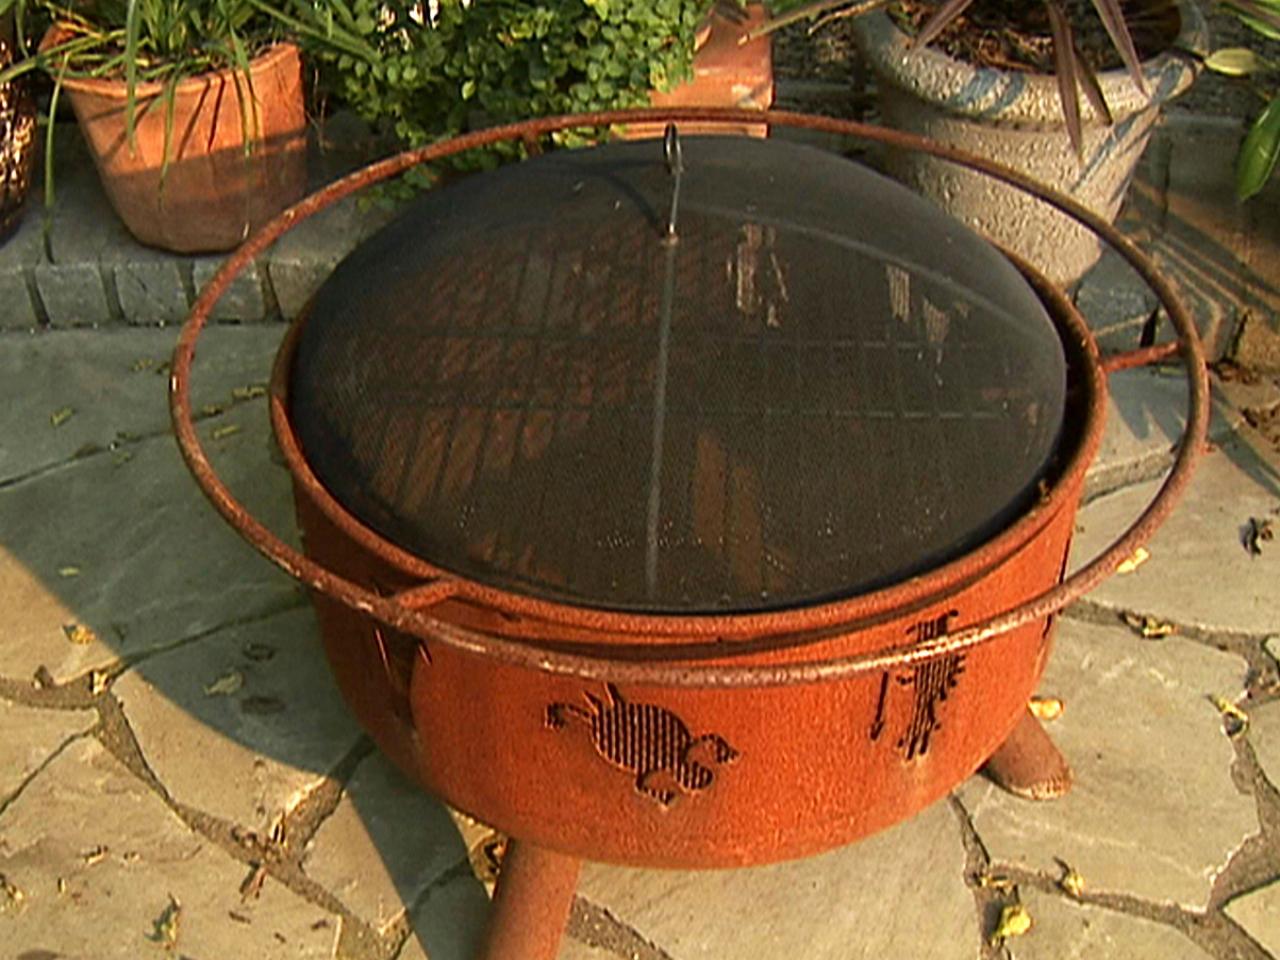 Outdoor Fire Pits And Pit Safety, Fire Pit Made From Propane Tank